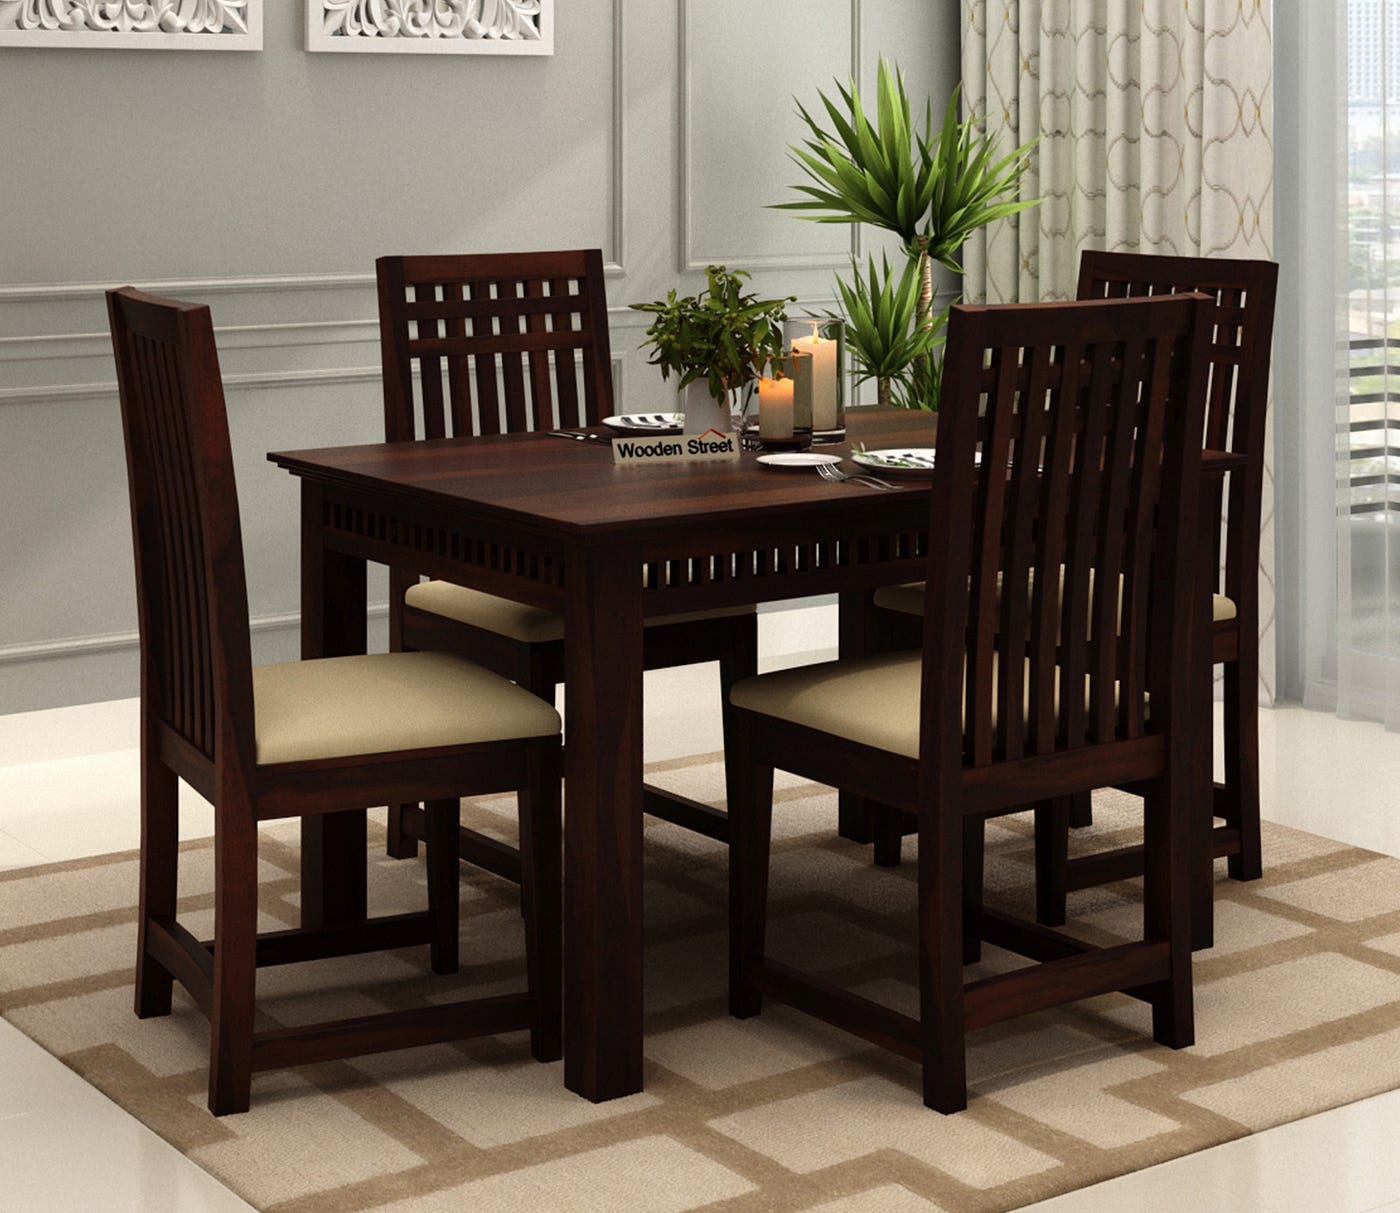 Adorn Your Home with the Best 4-Seater Dining Table | by Meghajain | Medium